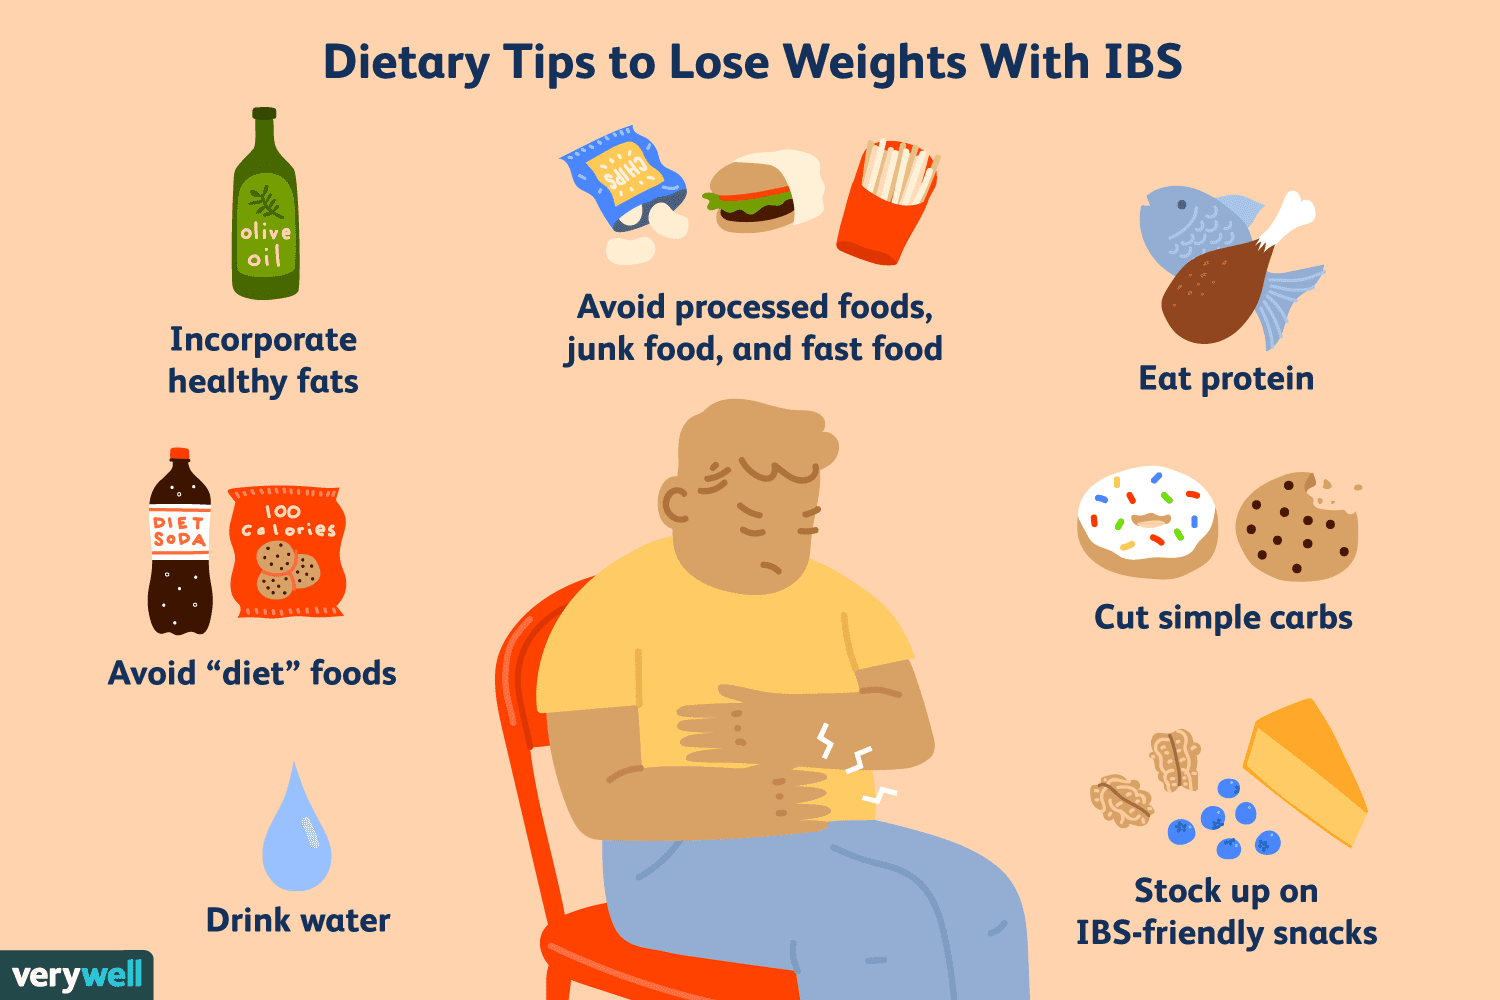 Strategies to Lose Weight With IBS